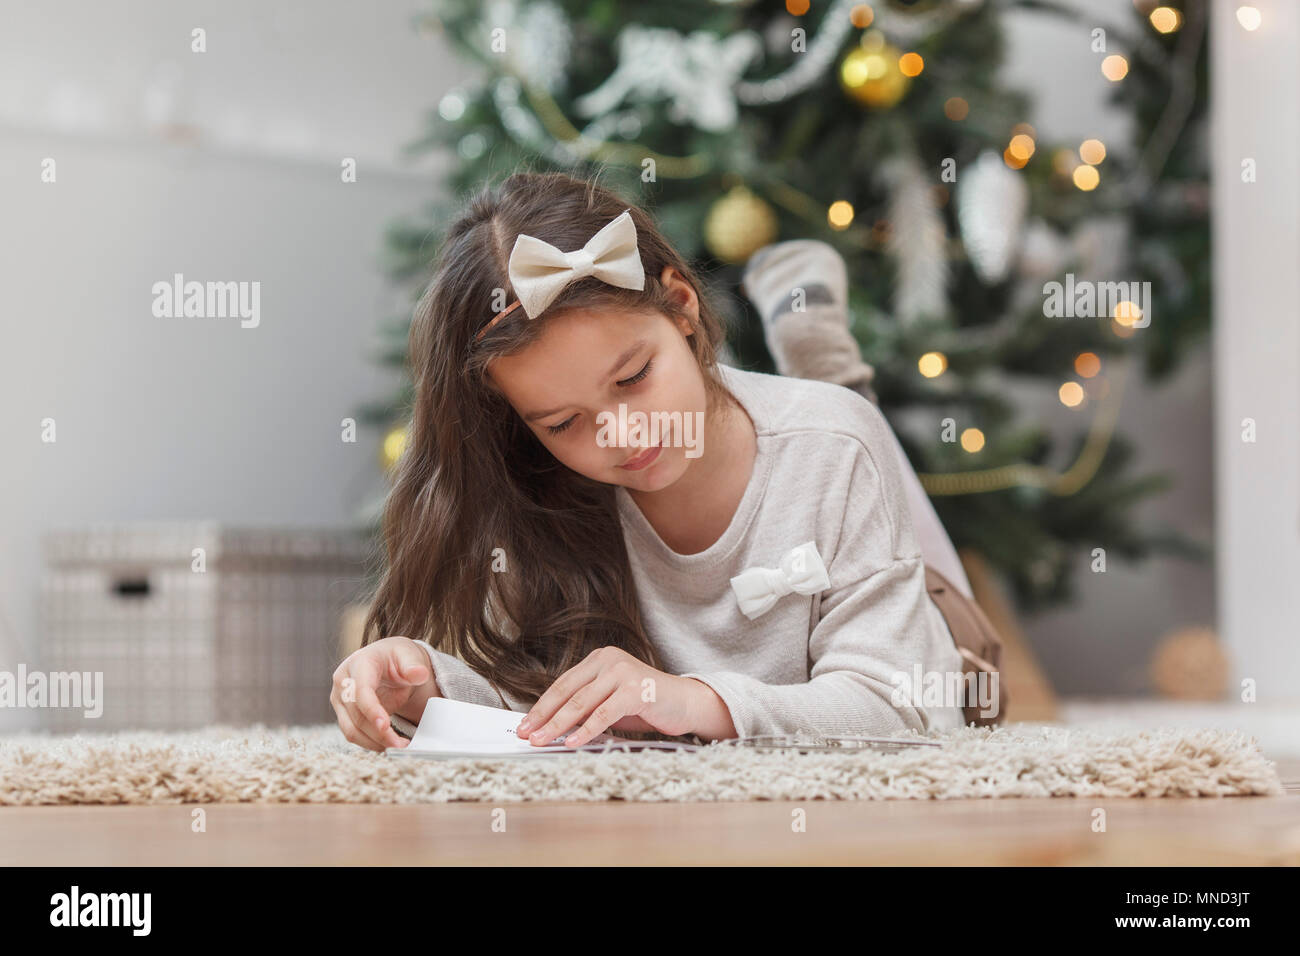 Girl lying on rug while reading book at home Stock Photo